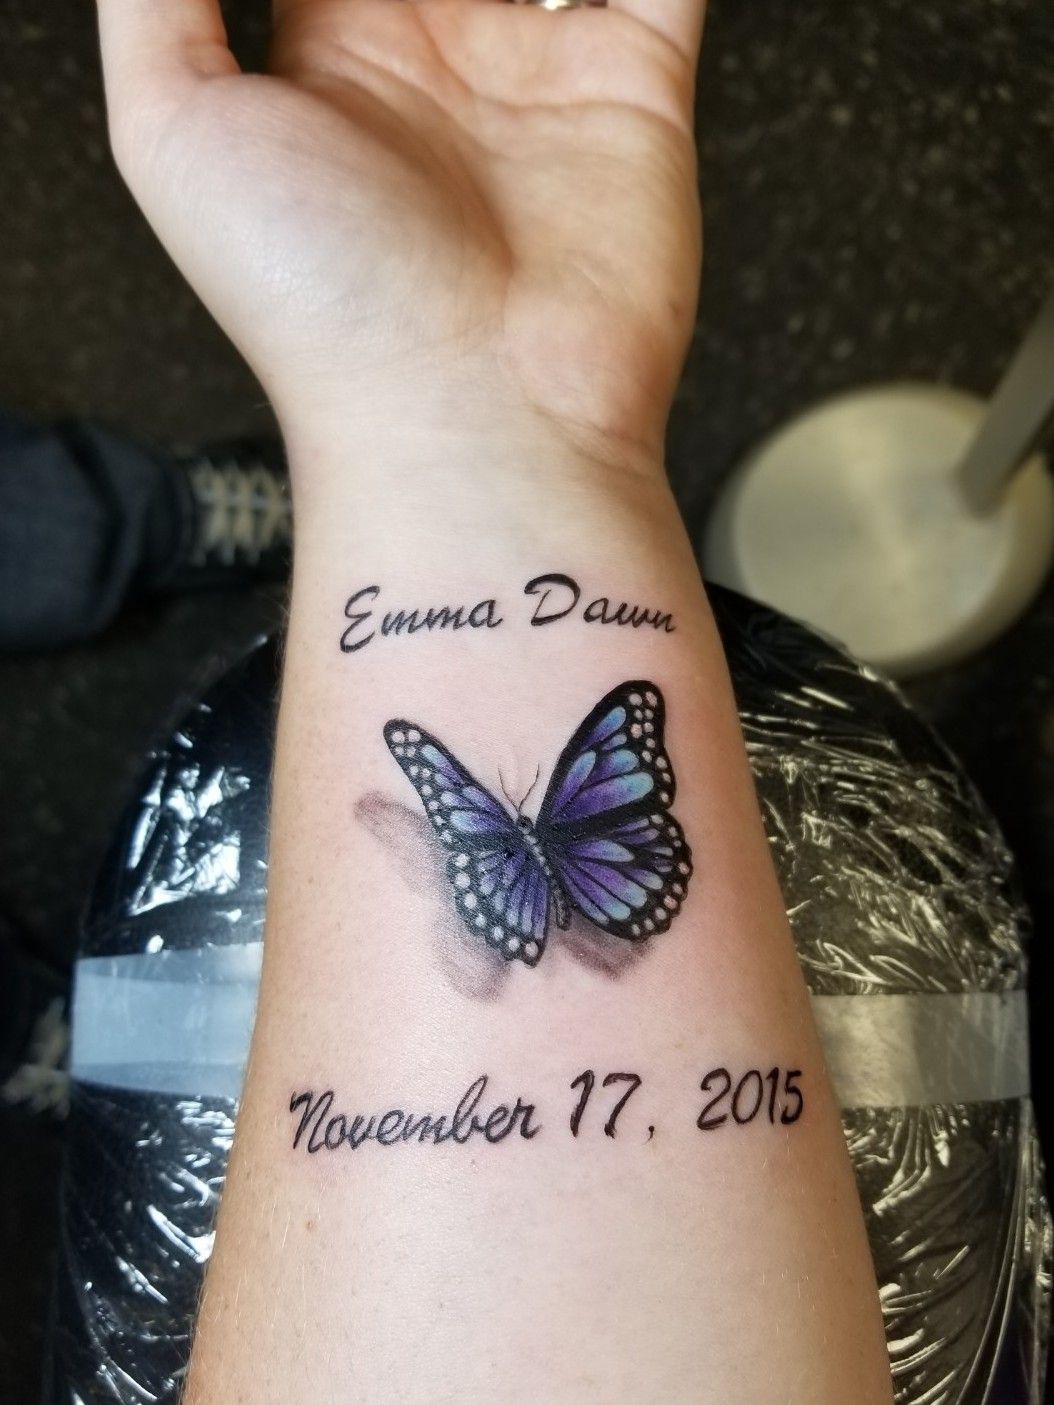 The Black Mantis  Fun butterfly  as memorial tattooRS Best  inspiration for custom designs  very often  is your stories  We have  available time for your or ours ideas